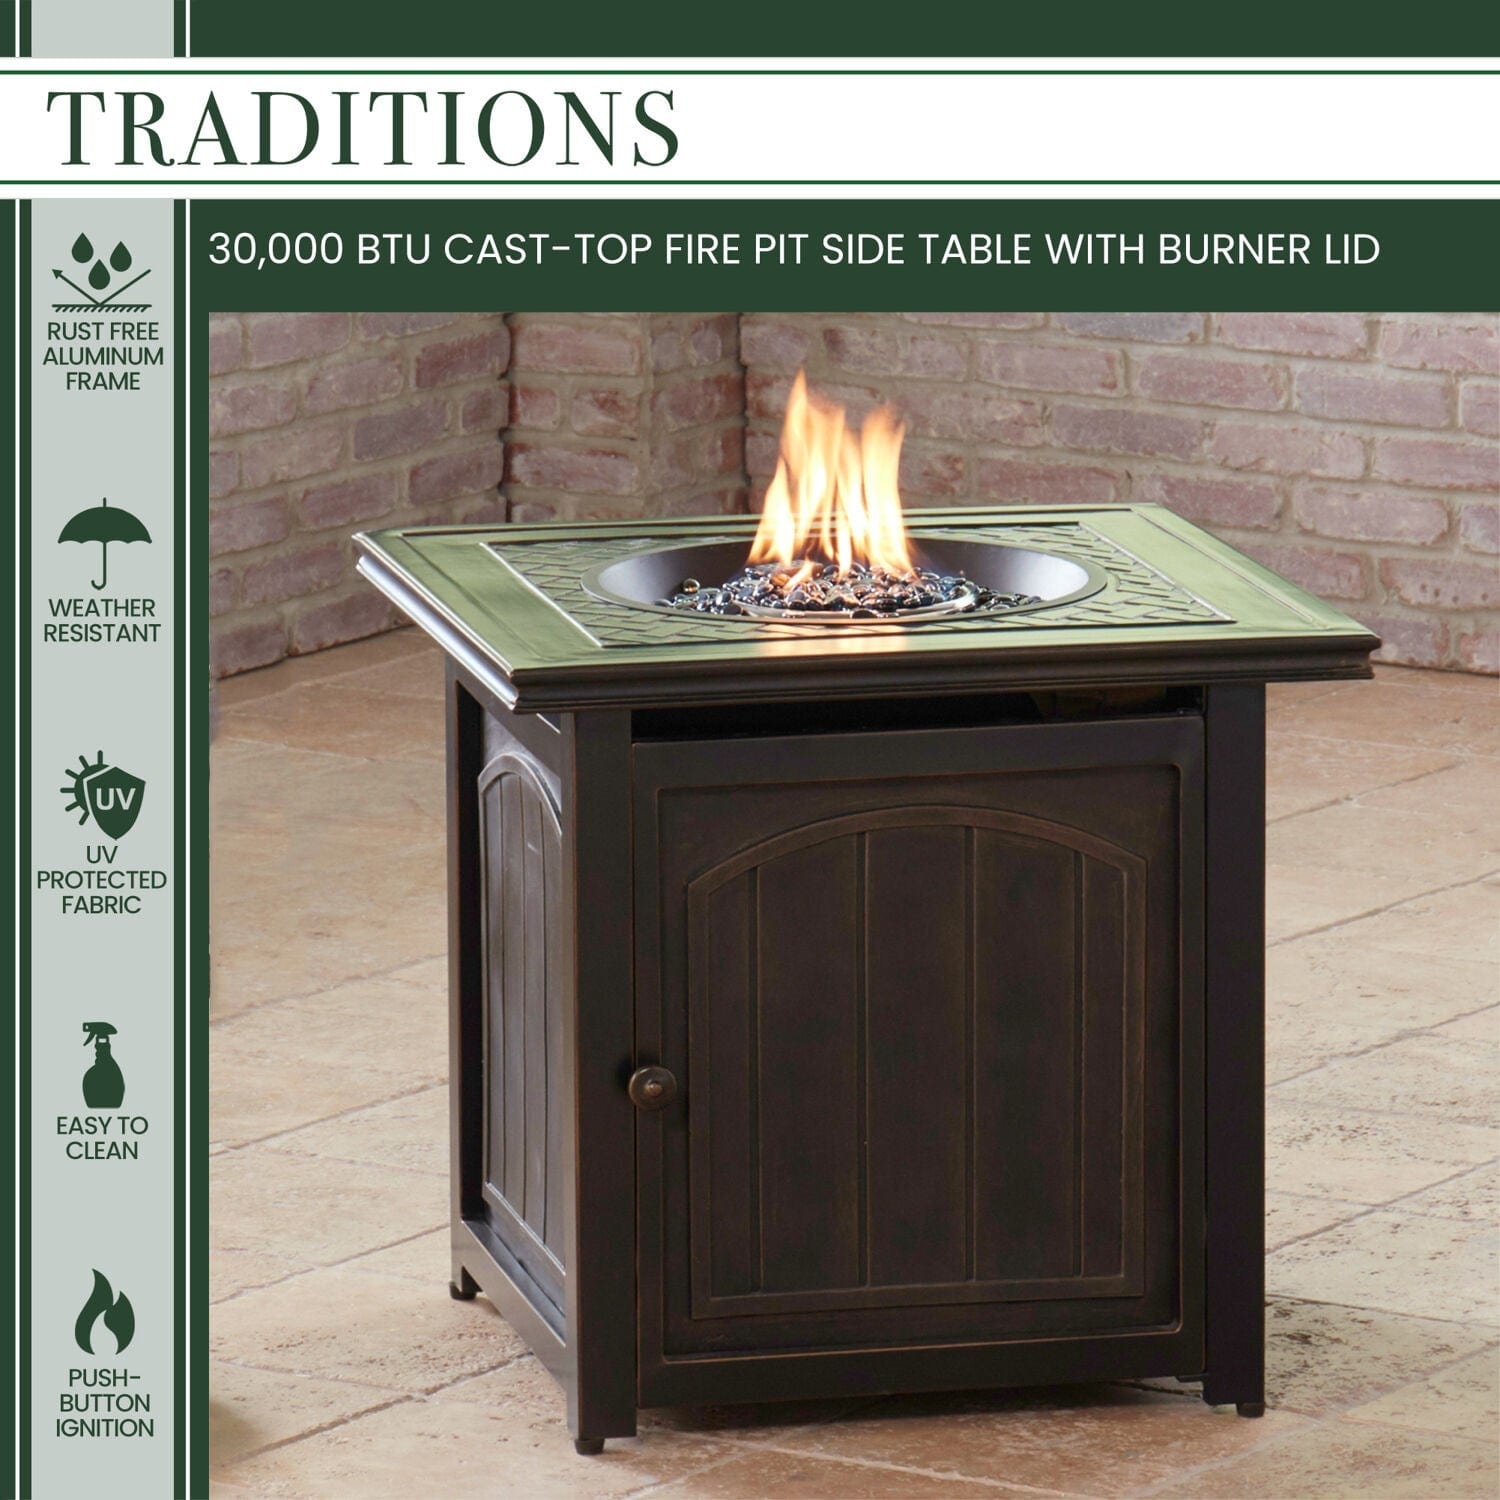 Hanover Fire Pit Chat Set Hanover - Traditions 5-Piece Aluminium Frame Fire Pit Chat Set in Natural Oat with 4 Swivel Rockers and a 26-In. Square Fire Pit Table |  TRAD5PCSWFPSQ-TAN